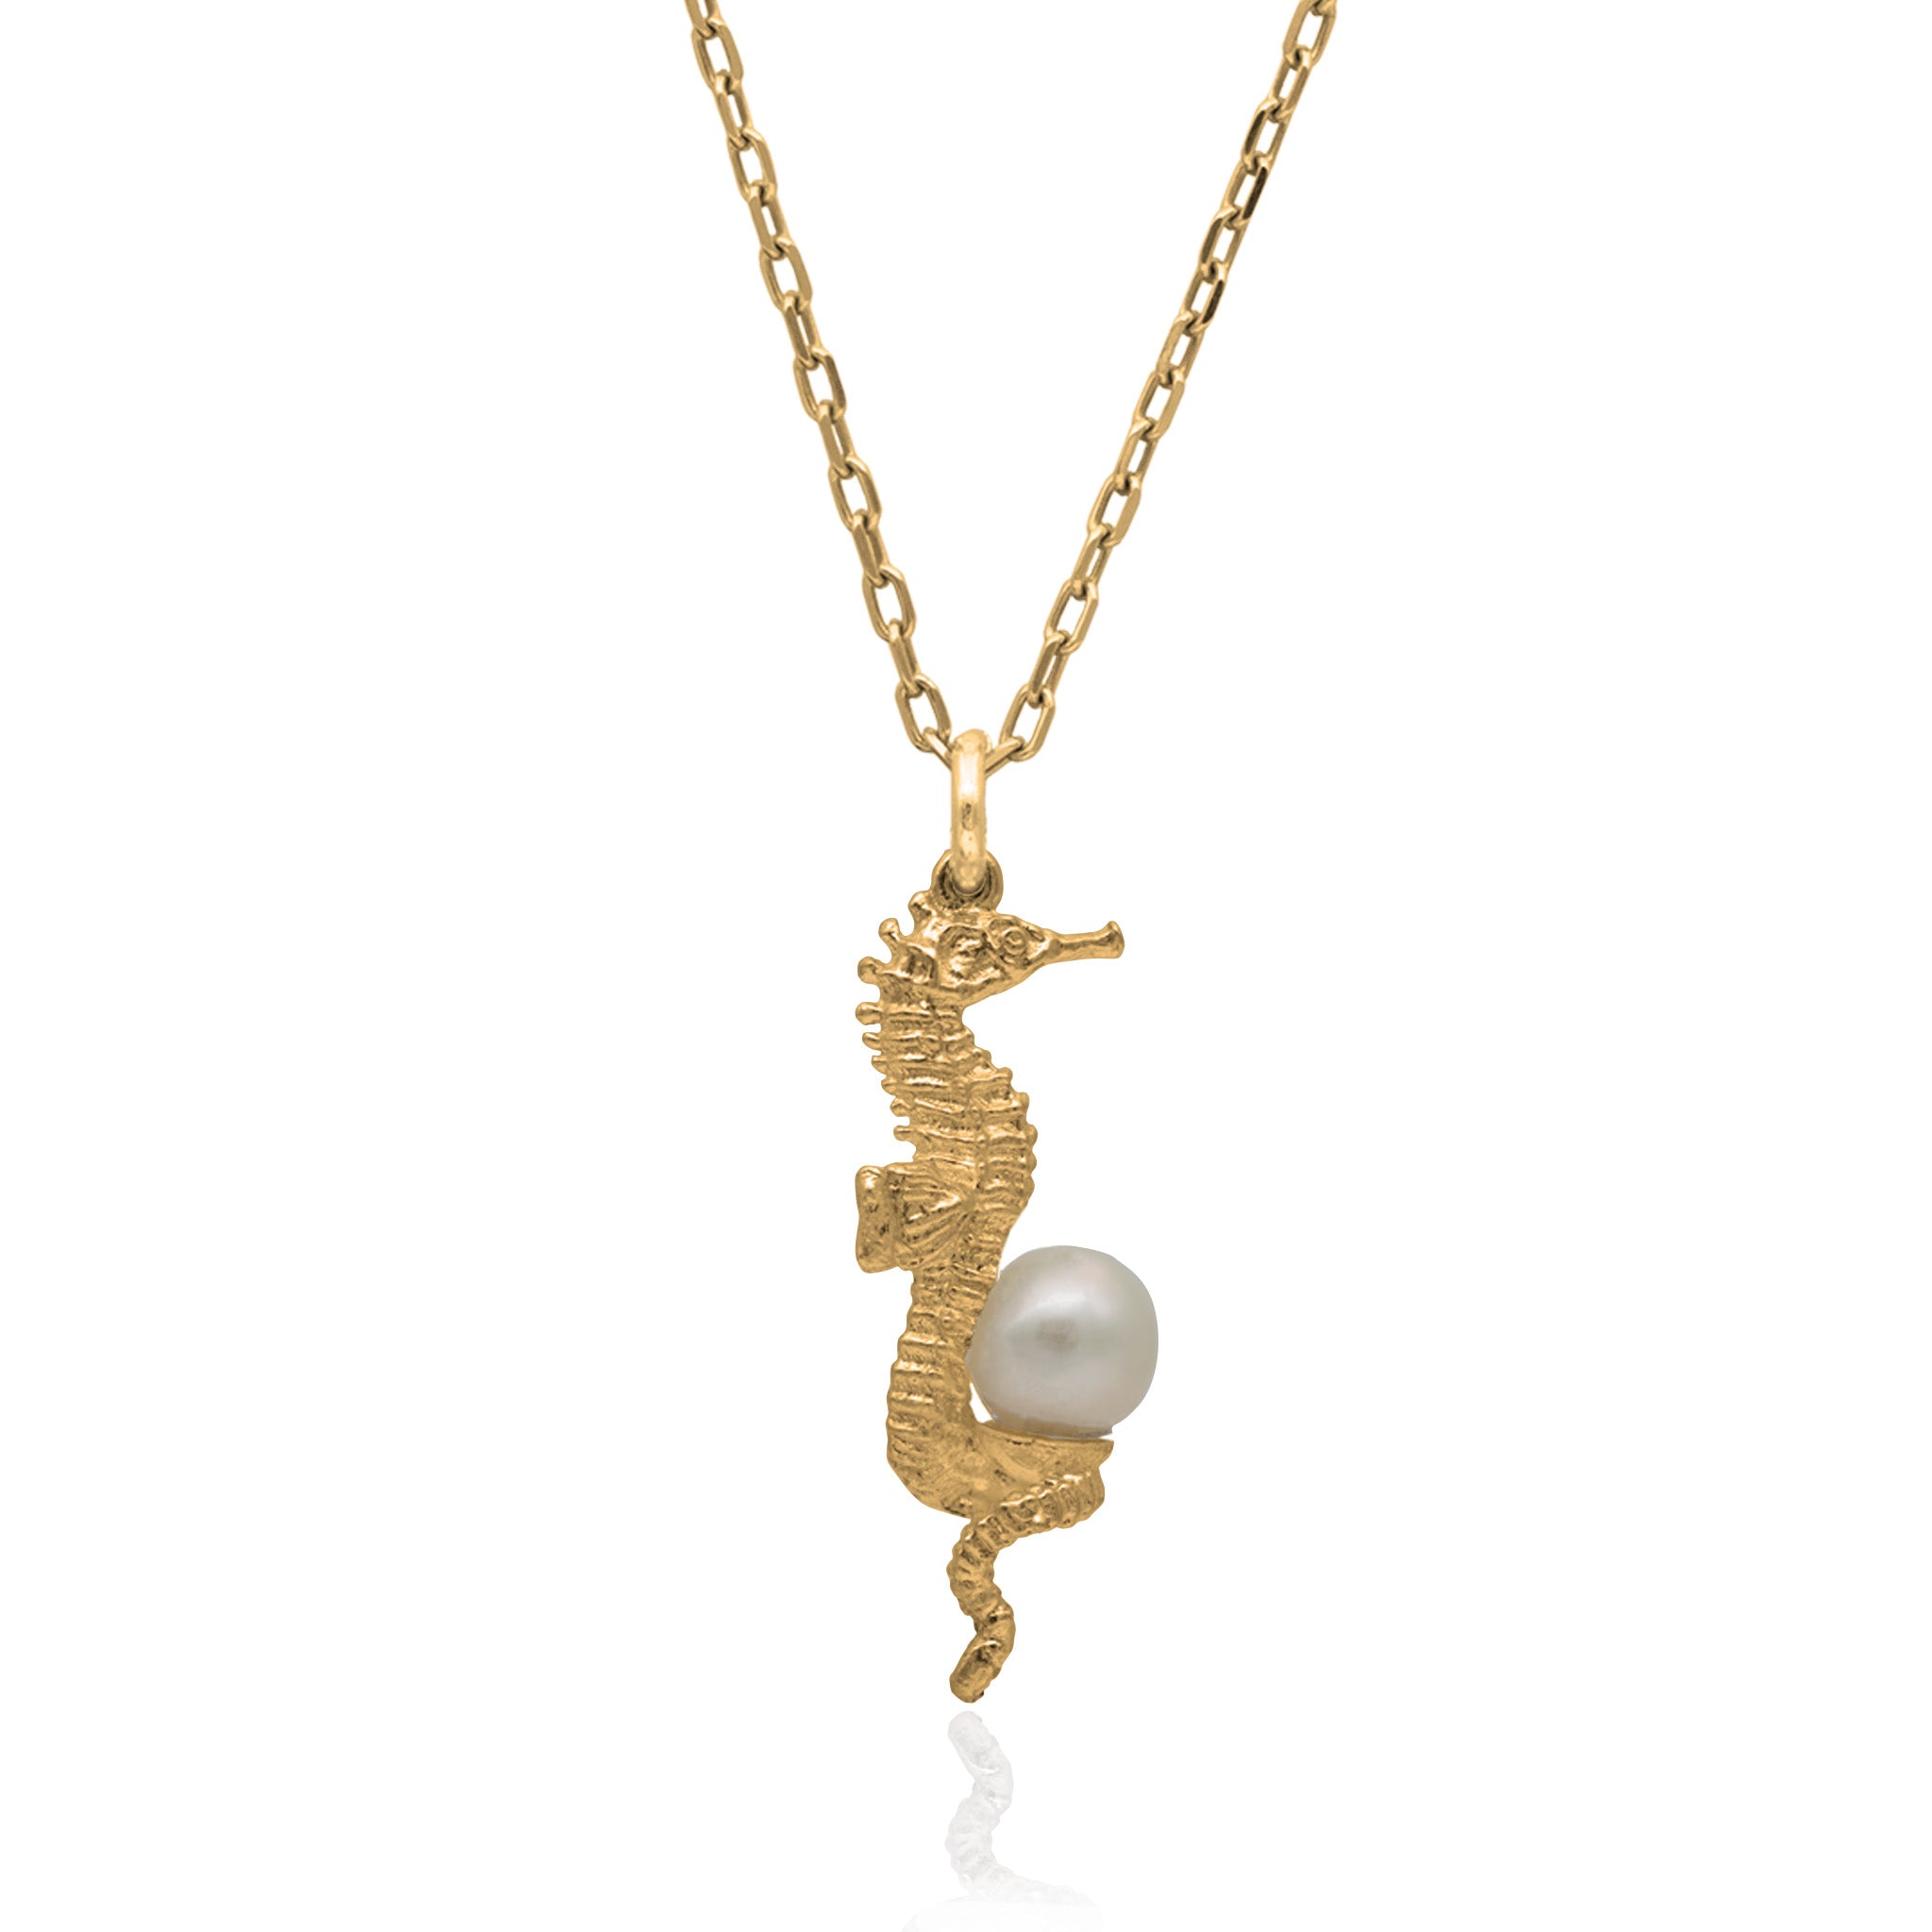 Buy Solid Gold Seahorse Pendant, 14k Gold Seahorse, Mothers Day Gift Online  in India - Etsy